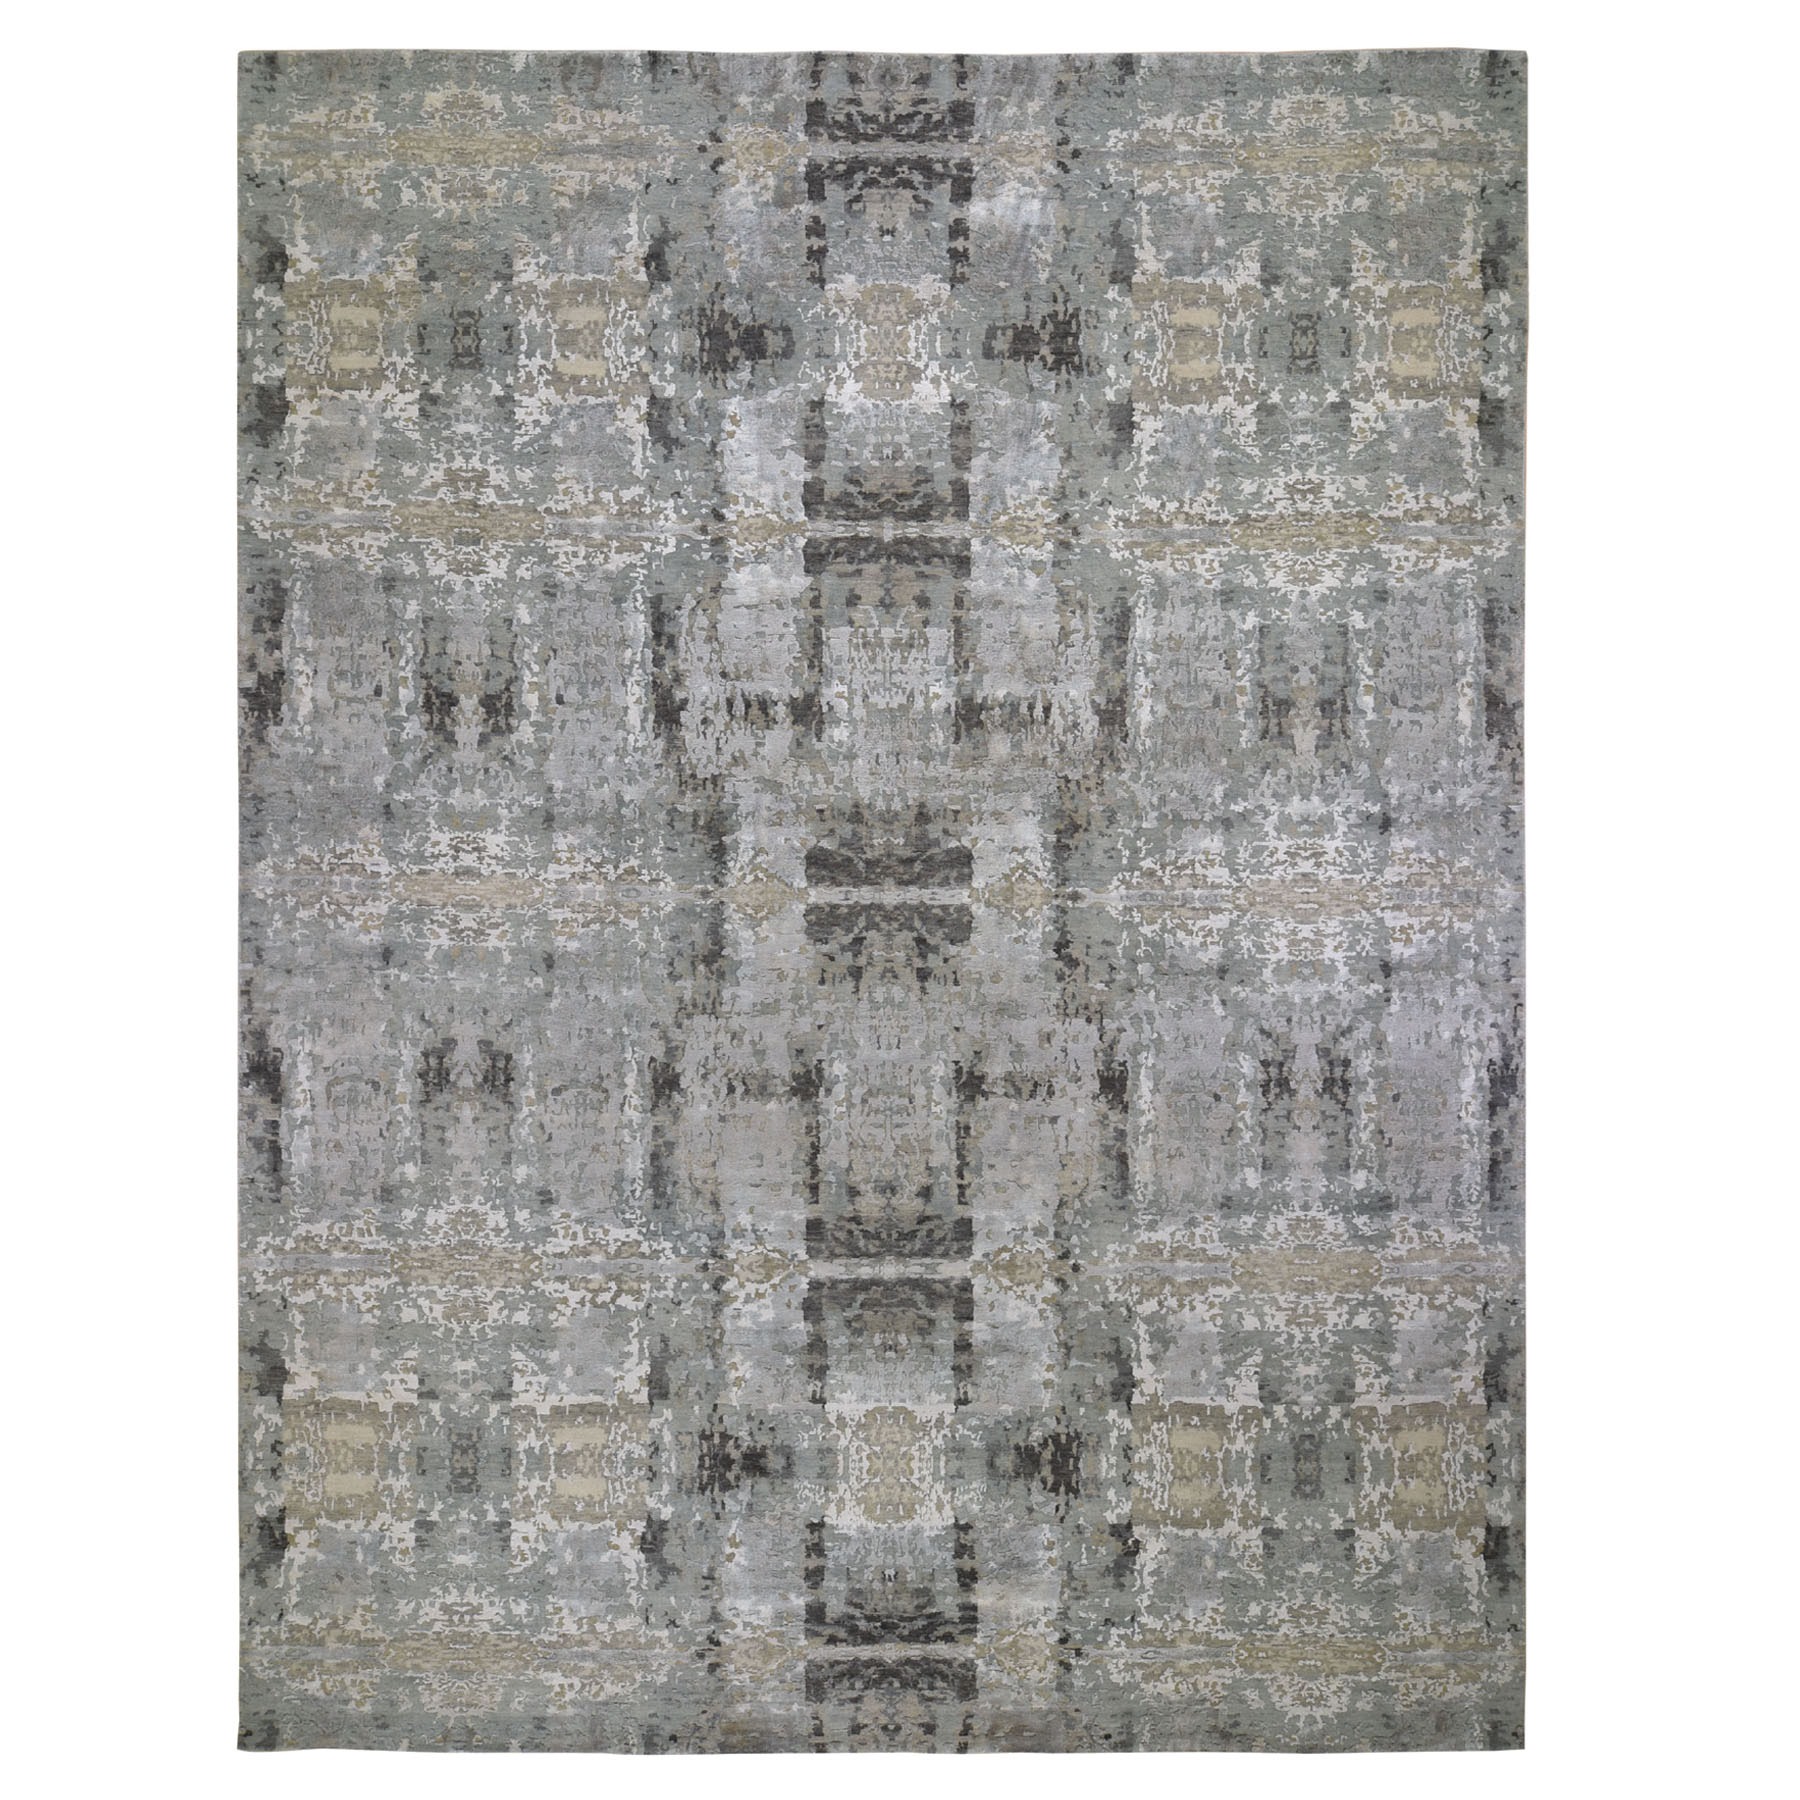 11'10"x14'10"  Oversized Silver Abstract Design Hi-Lo Pile Wool And Silk Hand Woven Oriental Rug 